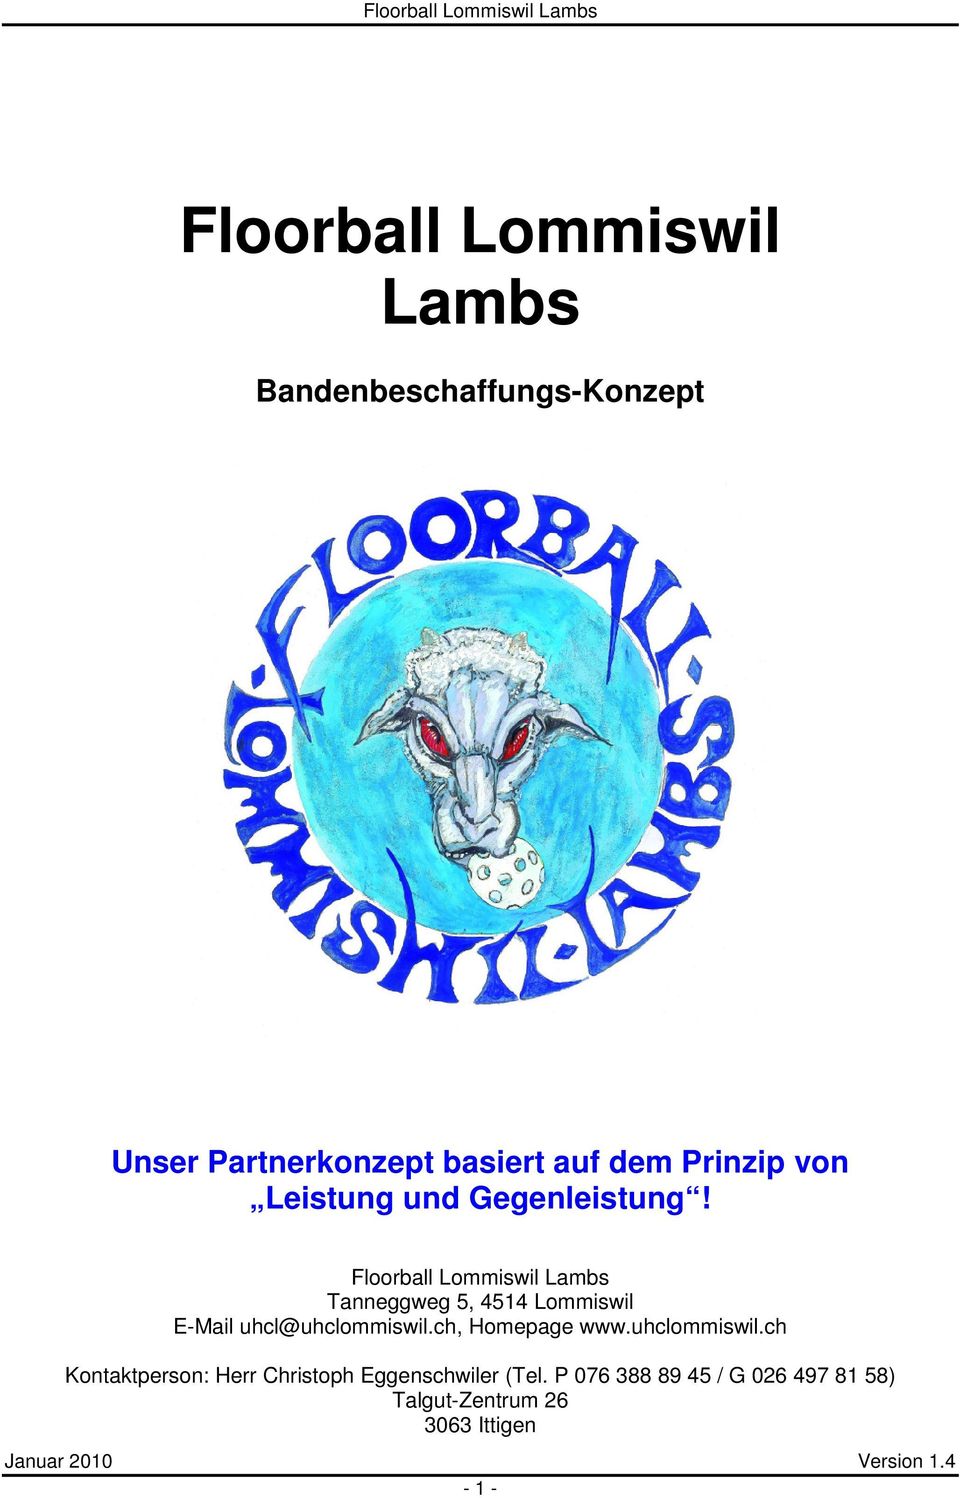 Floorball Lommiswil Lambs Tanneggweg 5, 4514 Lommiswil E-Mail uhcl@uhclommiswil.ch, Homepage www.